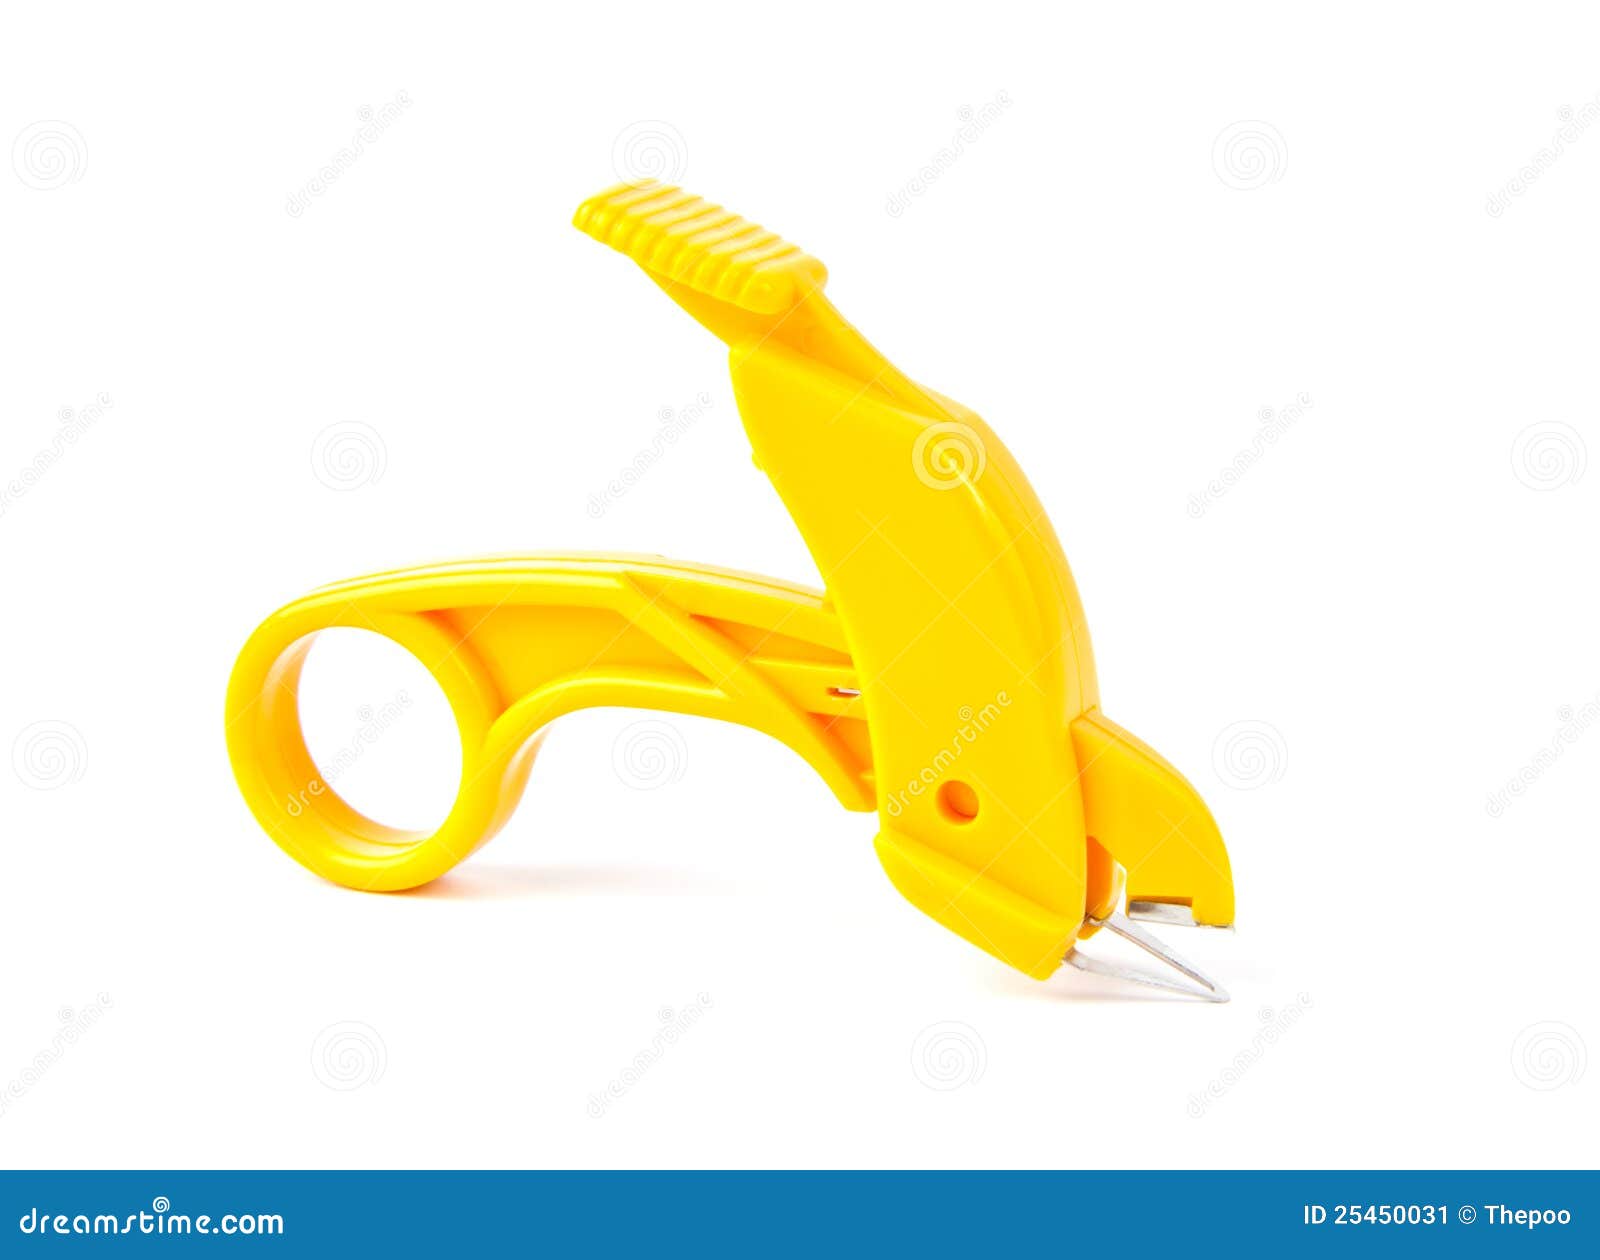 Staple Remover  On White  Background  Stock Image Image of 